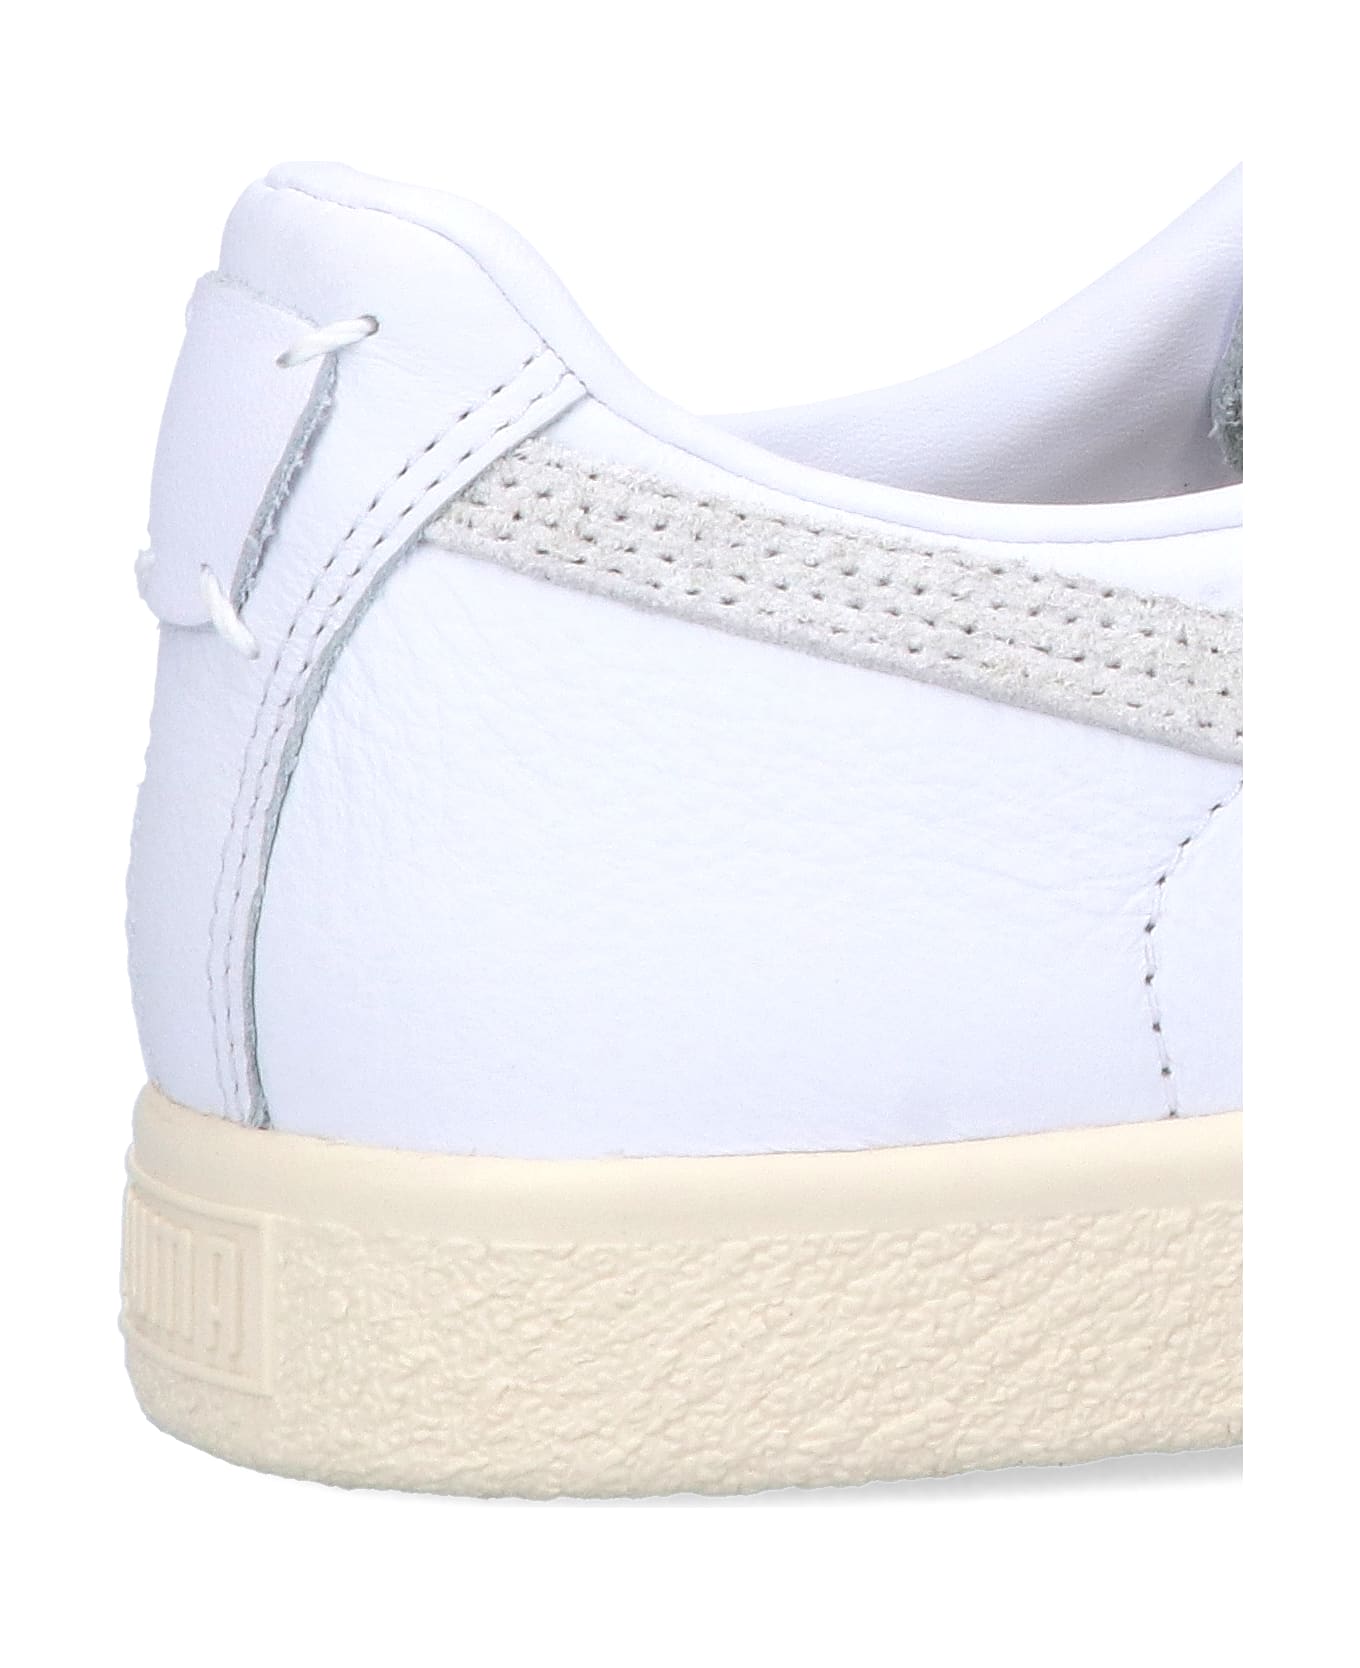 Puma 'clyde' Sneakers - White スニーカー